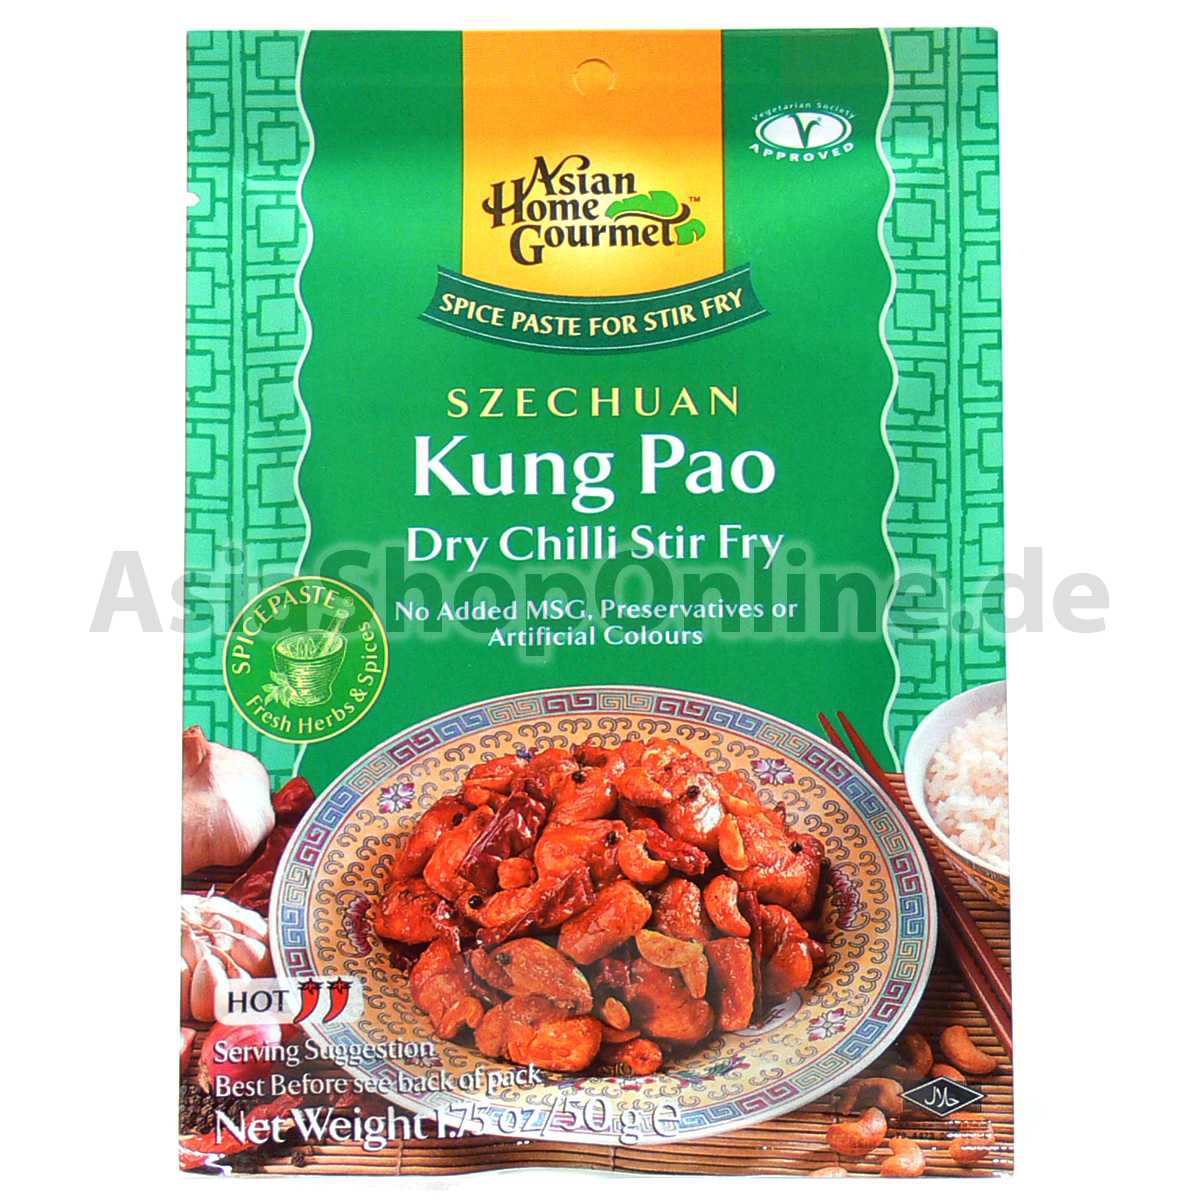 Kung Pao Chicken Würzpaste - Asian Home Gourmet - 50g